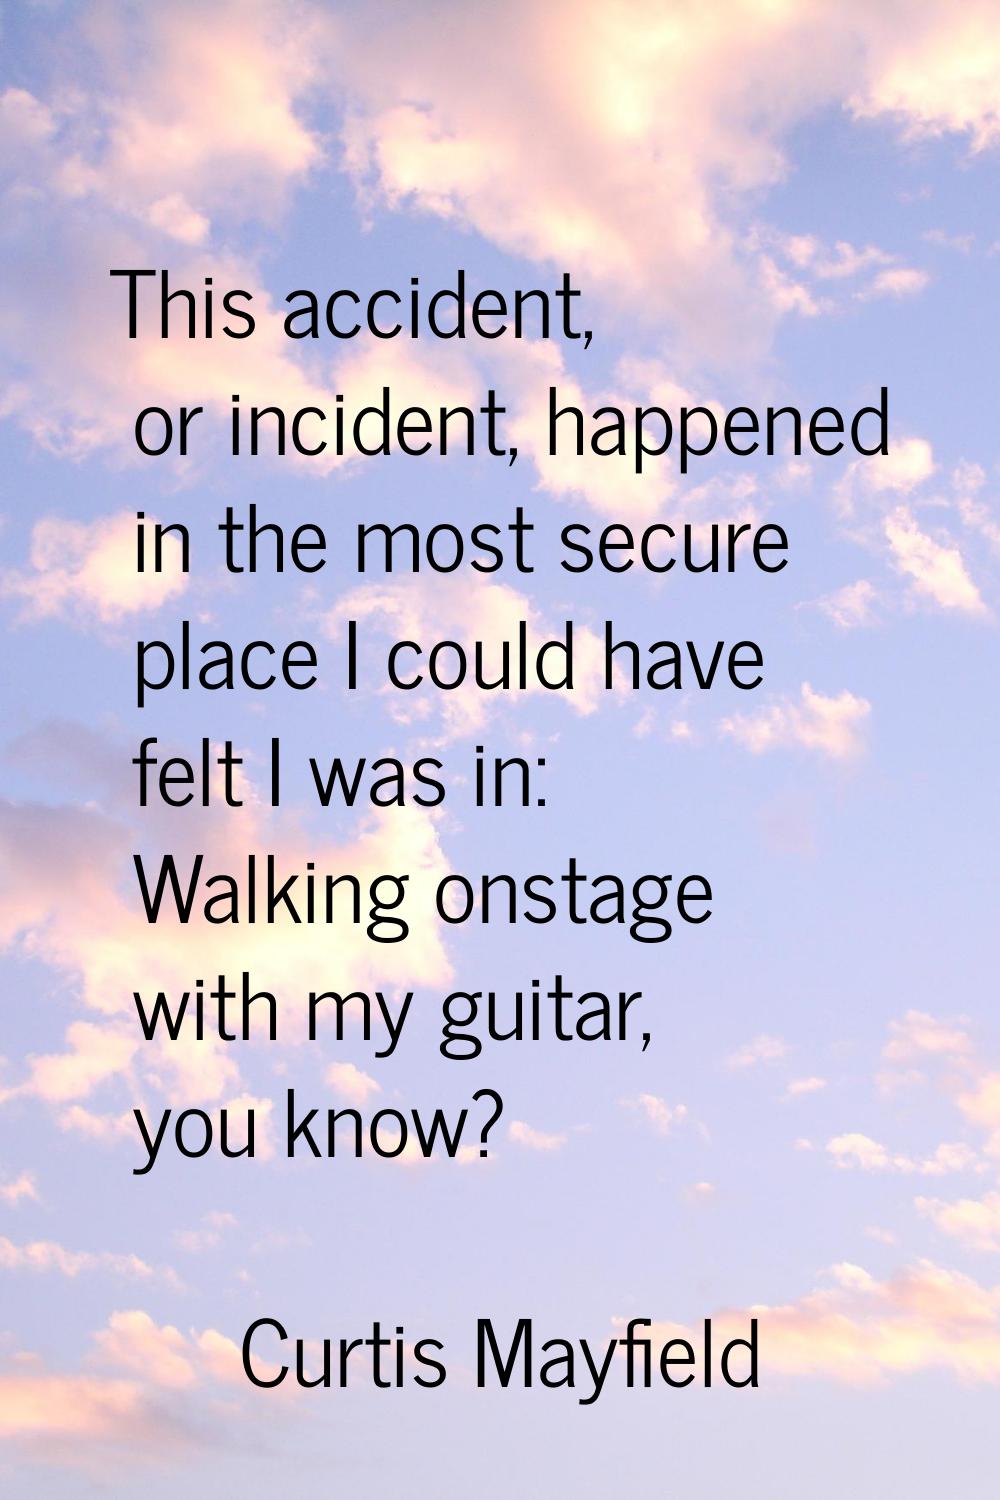 This accident, or incident, happened in the most secure place I could have felt I was in: Walking o